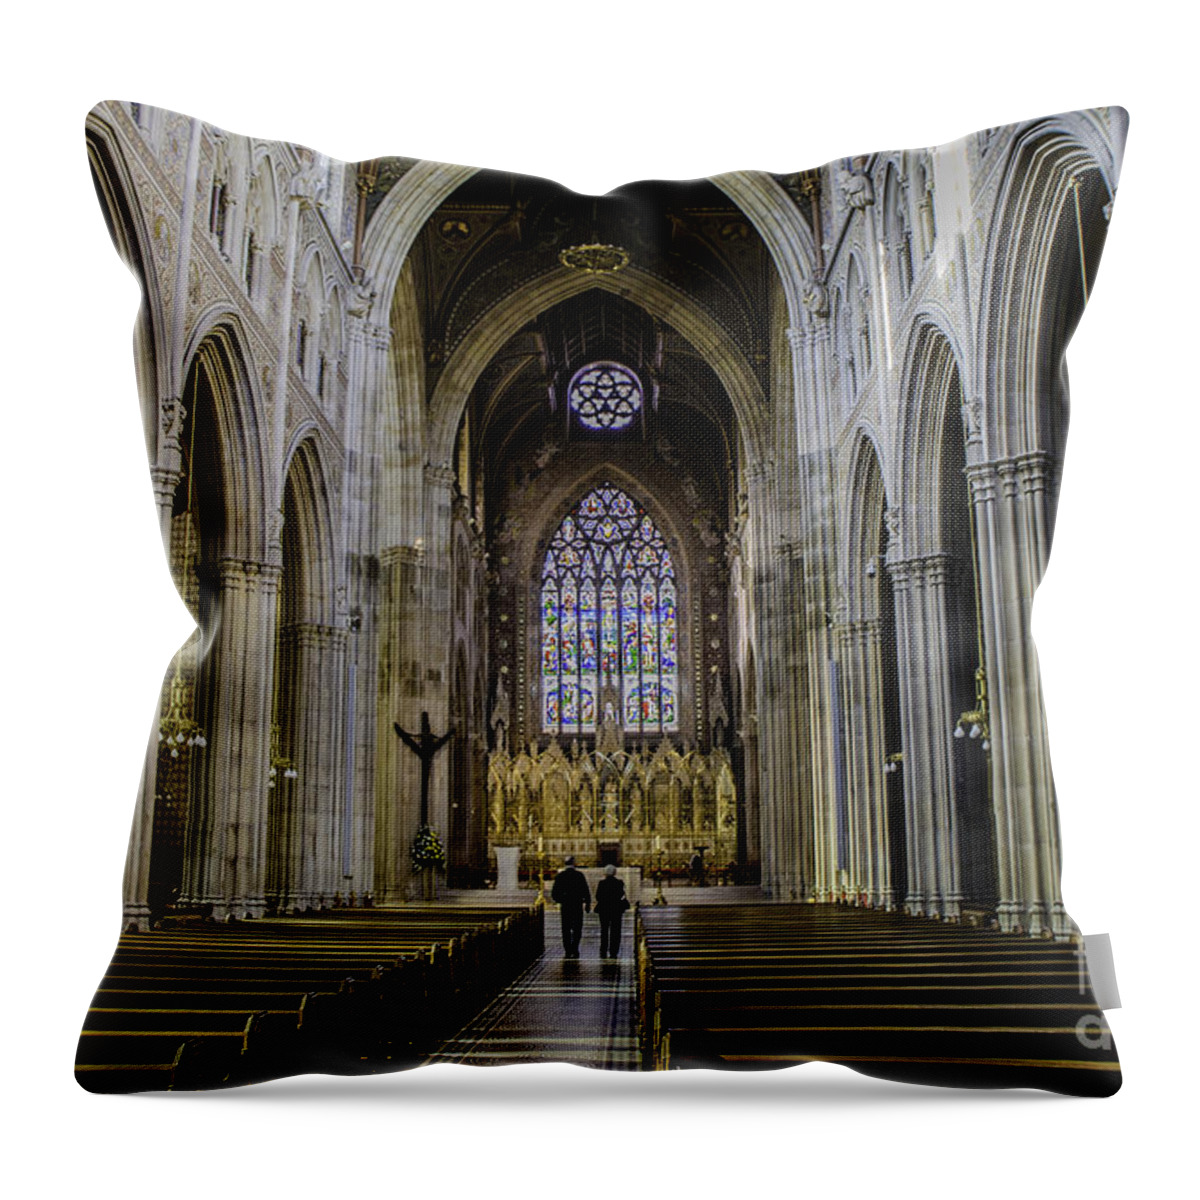 Aisle Throw Pillow featuring the photograph Reverence - St. Patrick's Church by Mary Carol Story